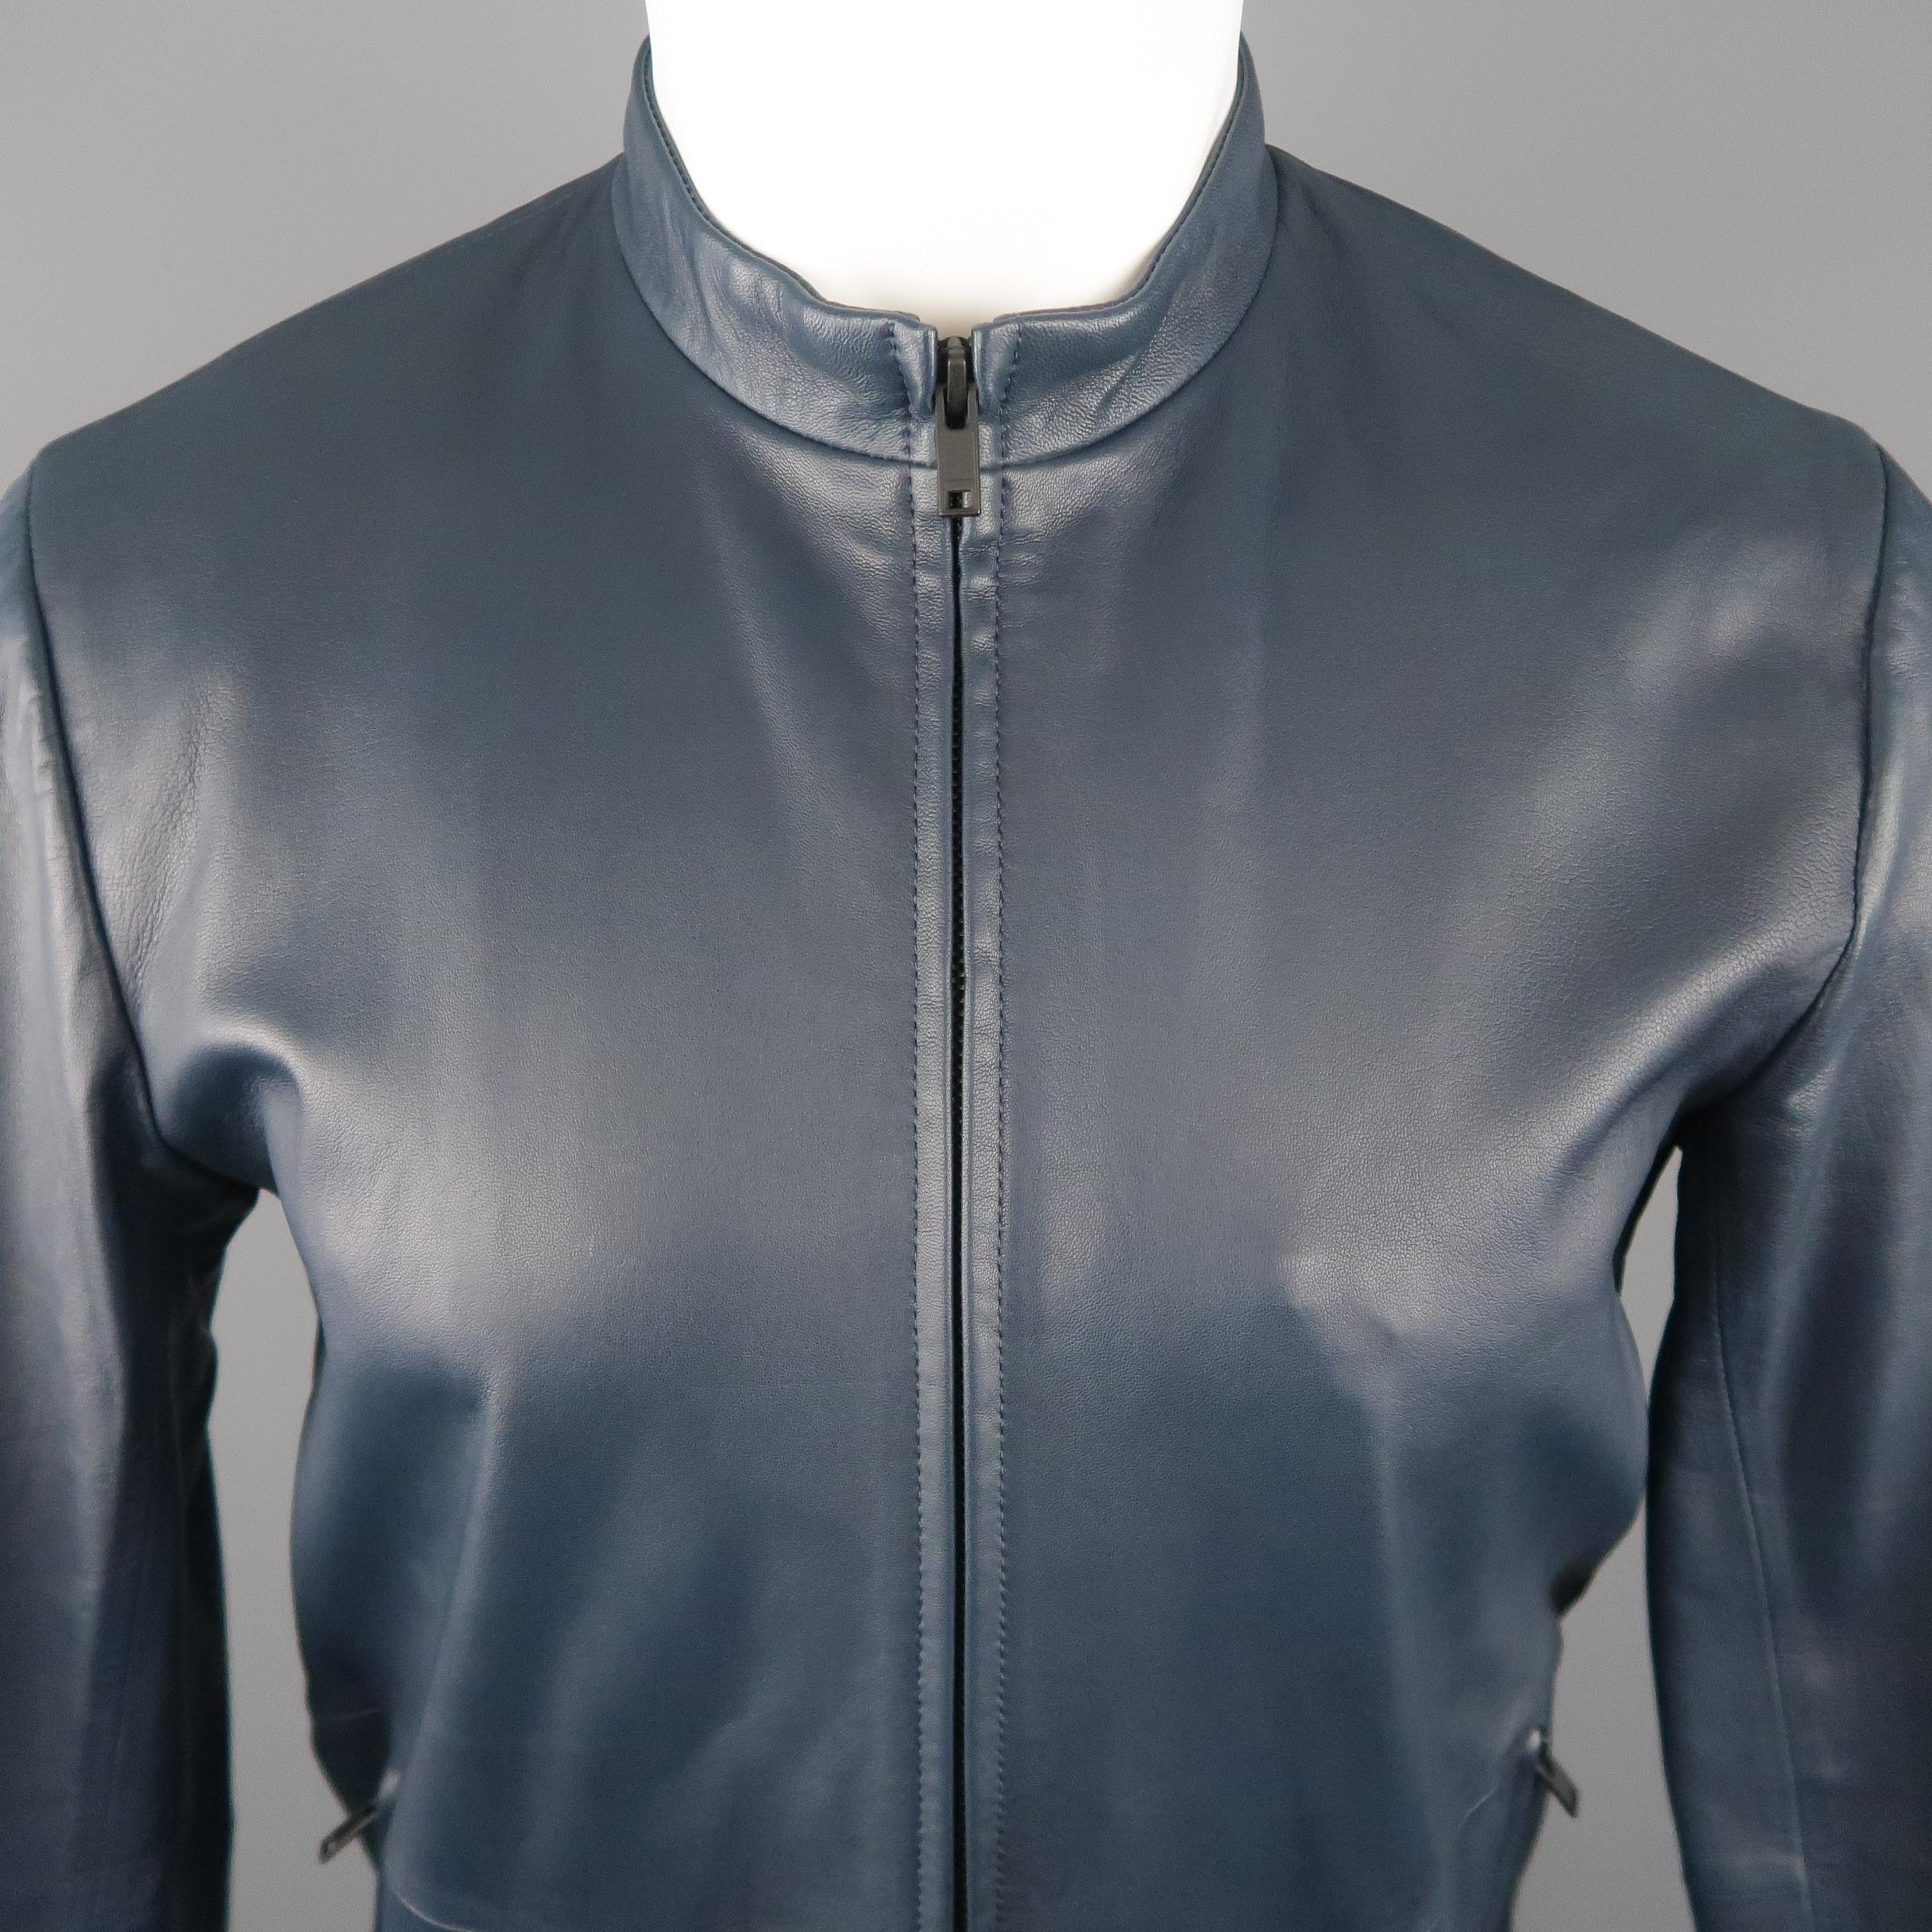 THEORY Jacket comes in a navy tone in a solid leather material, with zip pockets, zip up.
 
Excellent  Pre-Owned Condition.
Marked: S
 
Measurements:
 
Shoulder: 17 in.
Chest: 40 in.
Sleeve: 26 in.
Length: 25 in.